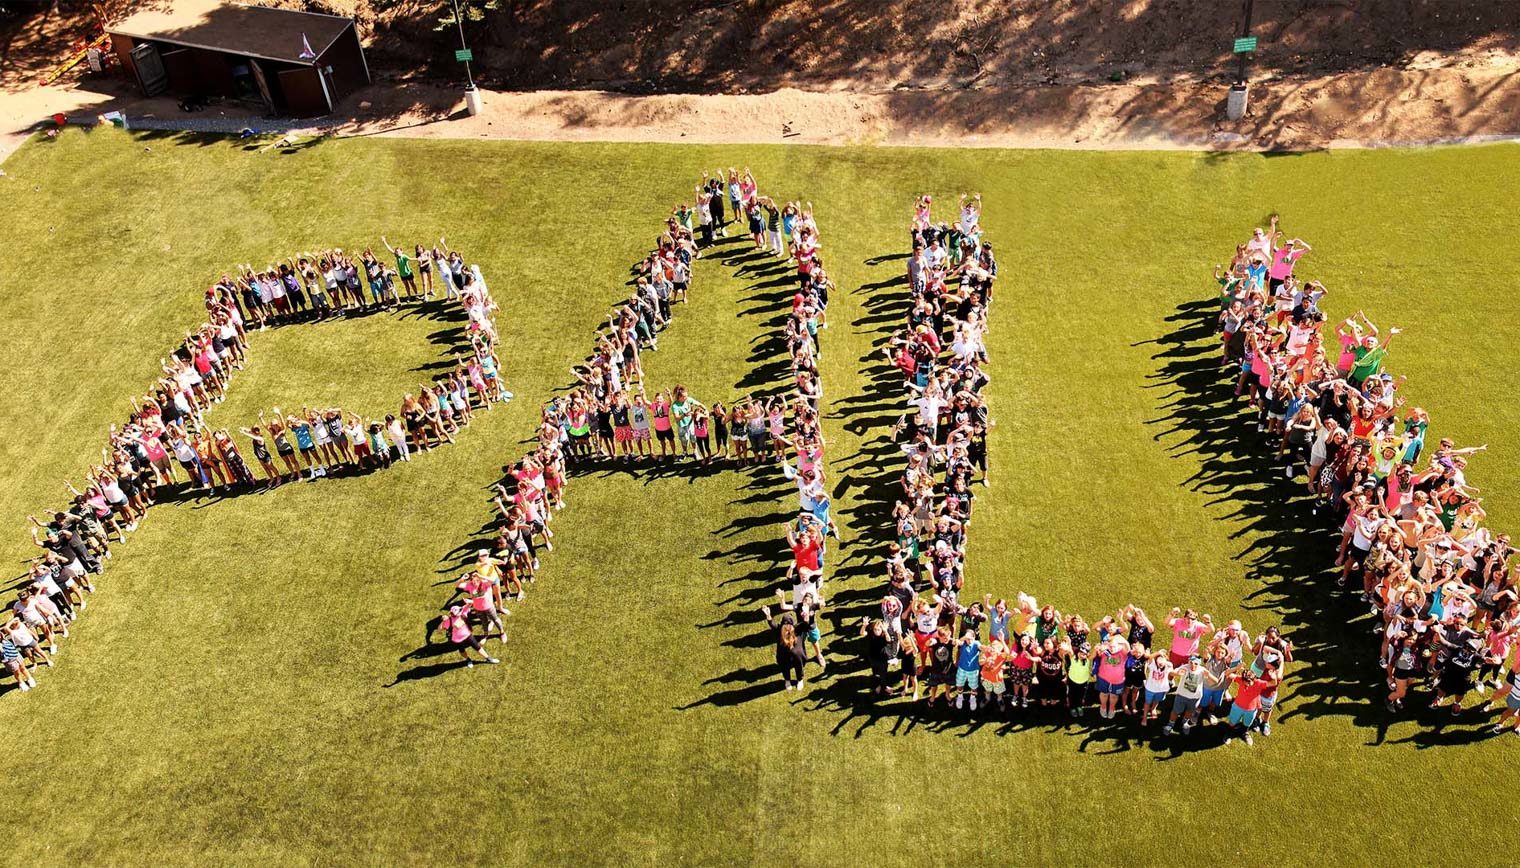 An aerial view of people lined up to spell out PALI.